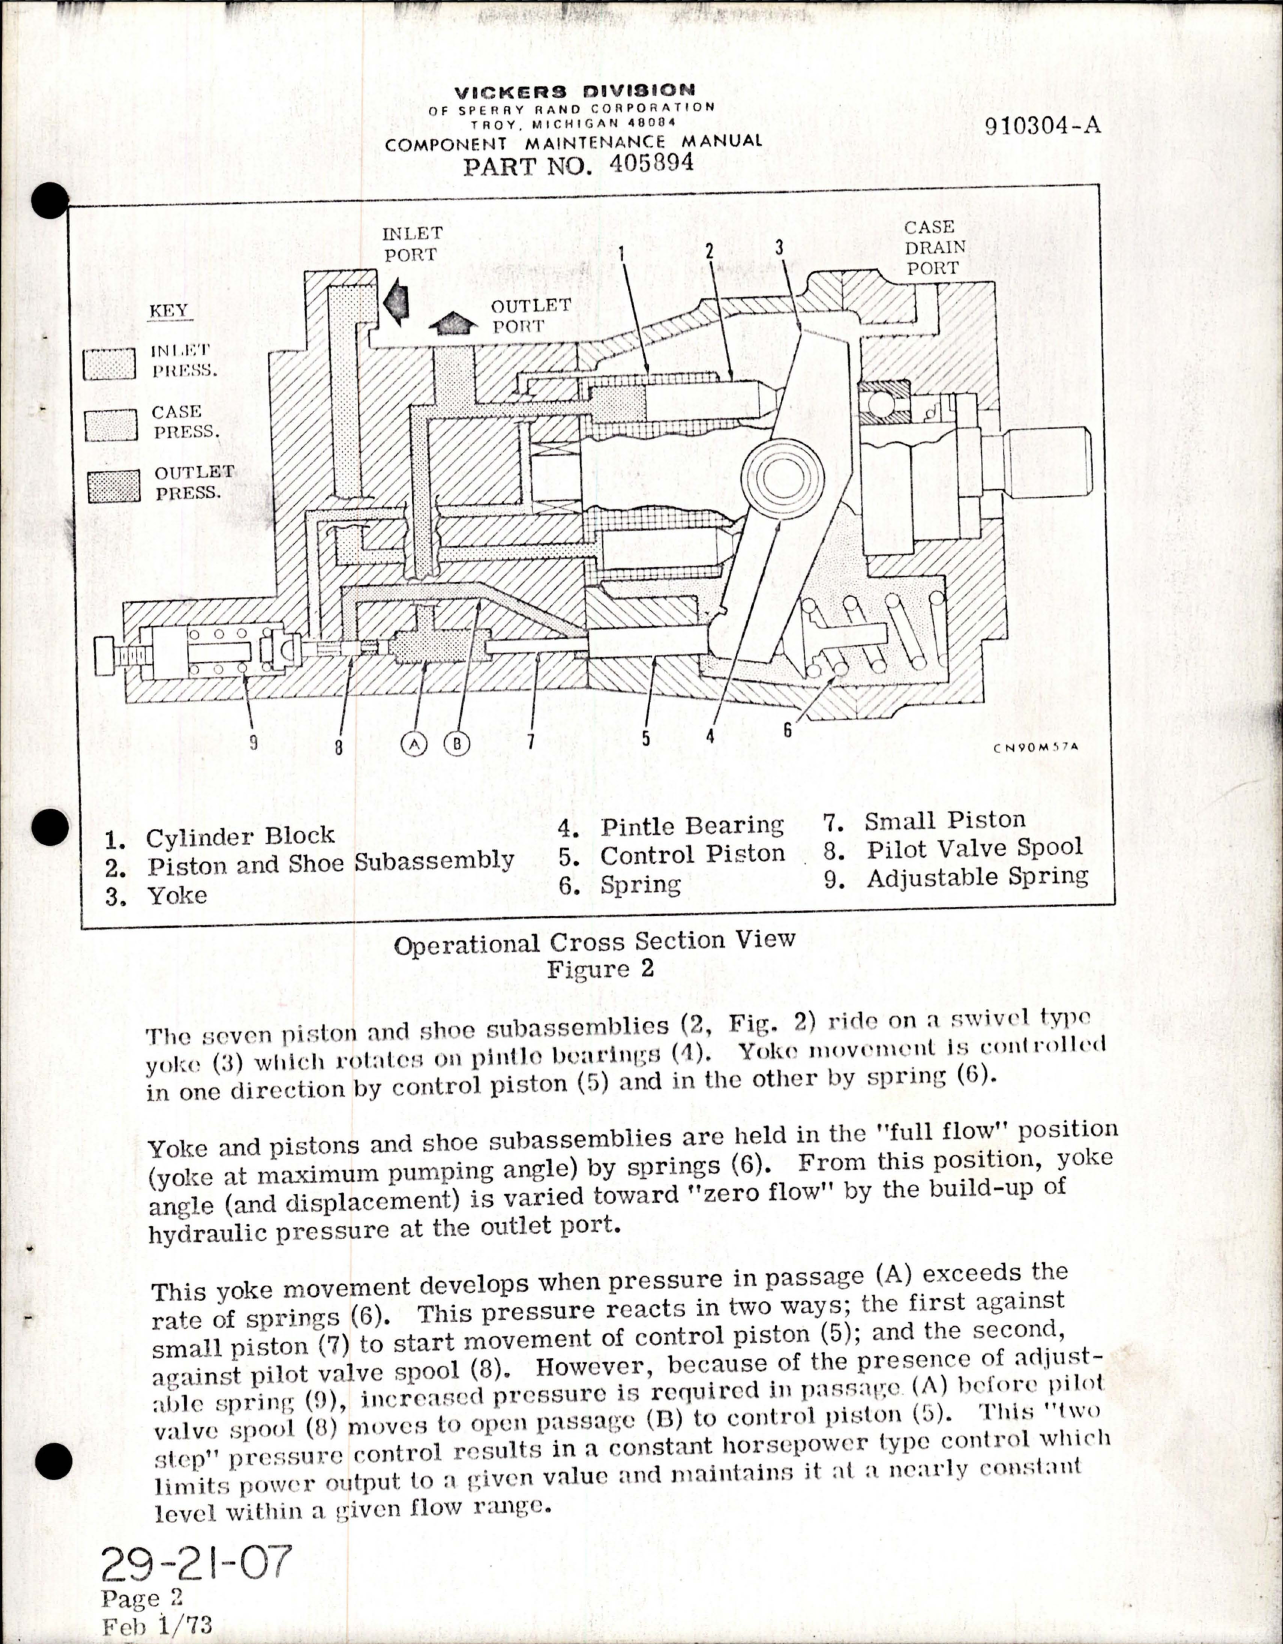 Sample page 9 from AirCorps Library document: Component Maintenance Manual for Hydraulic Pump - Part 405894 